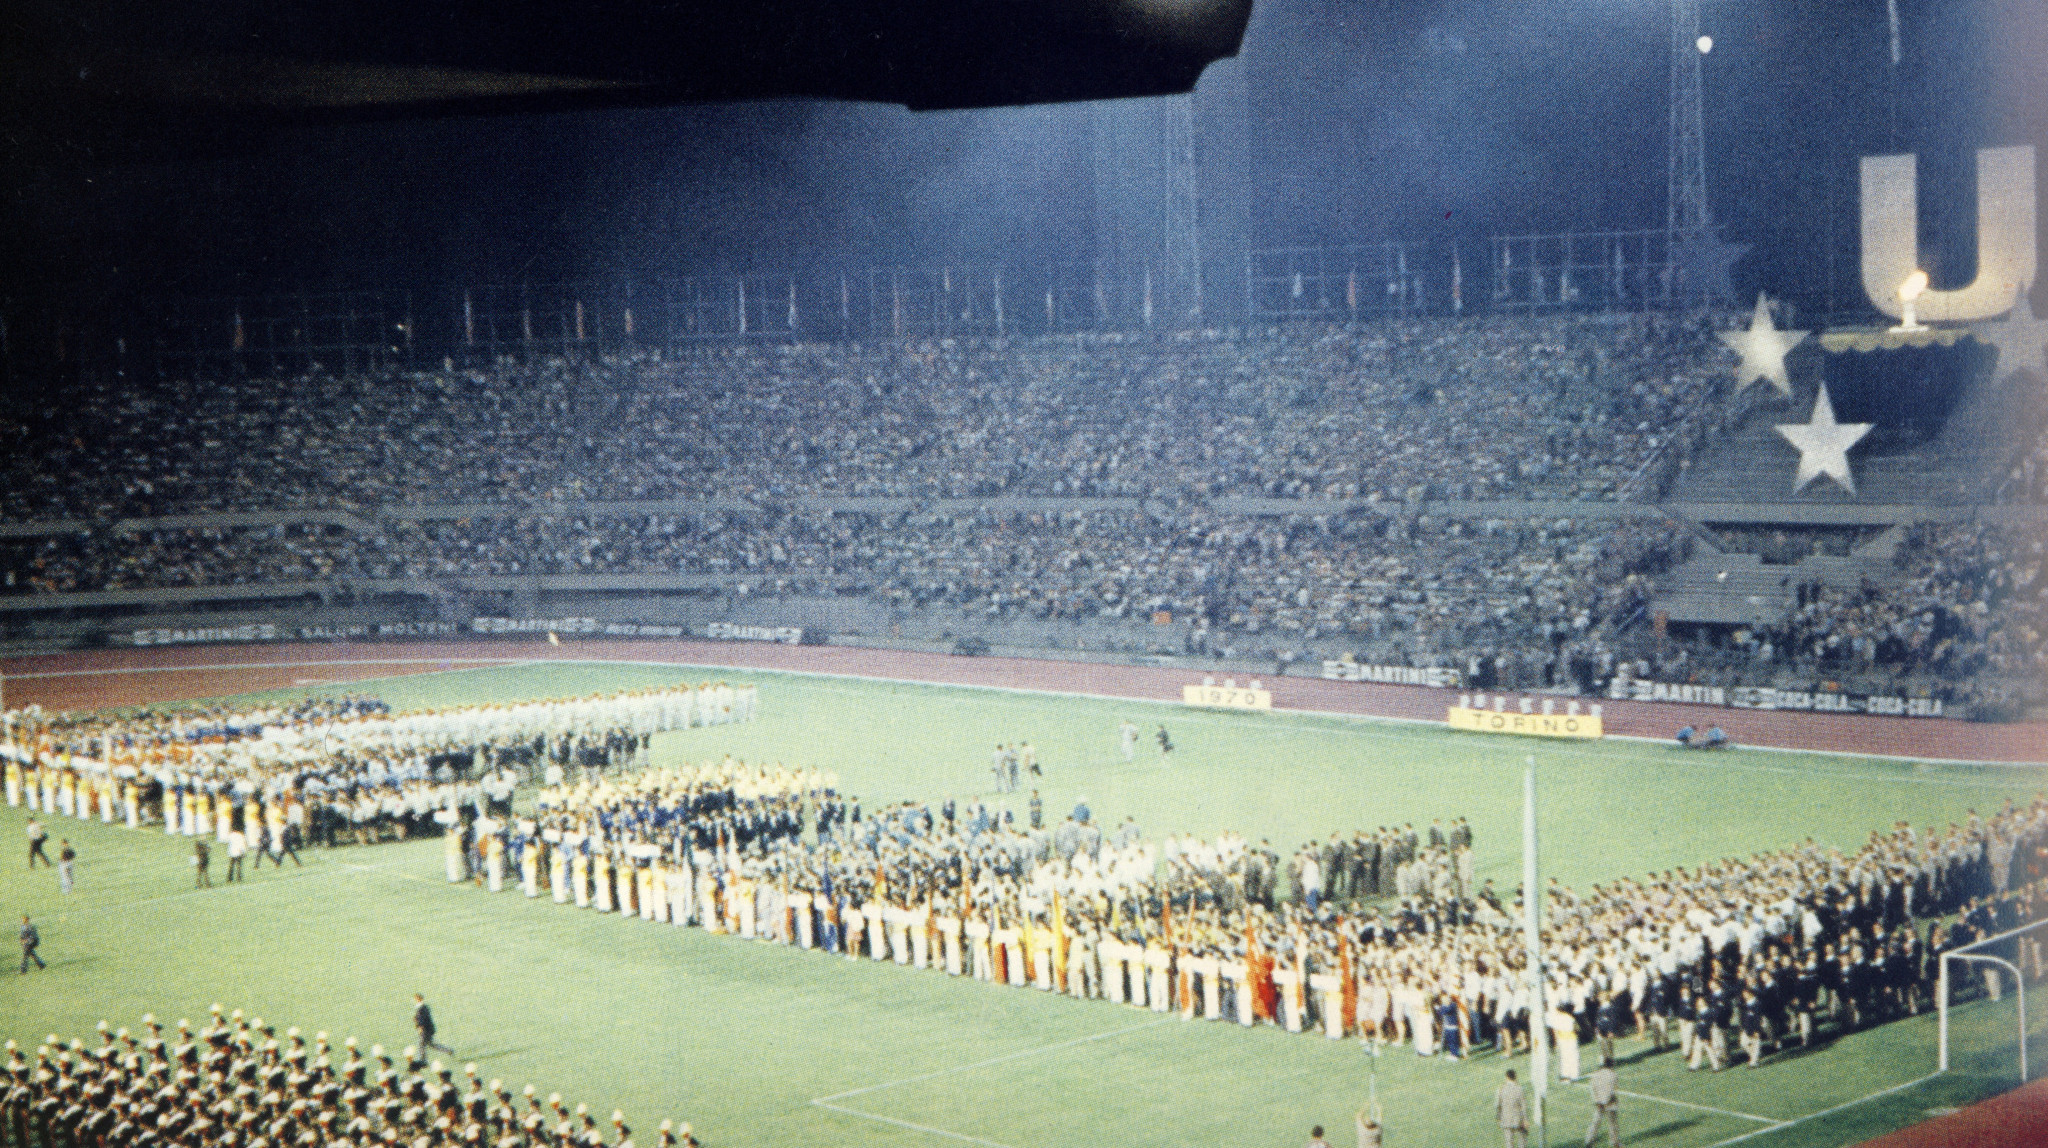 The Turin 1970 Opening Ceremony ©CUSI